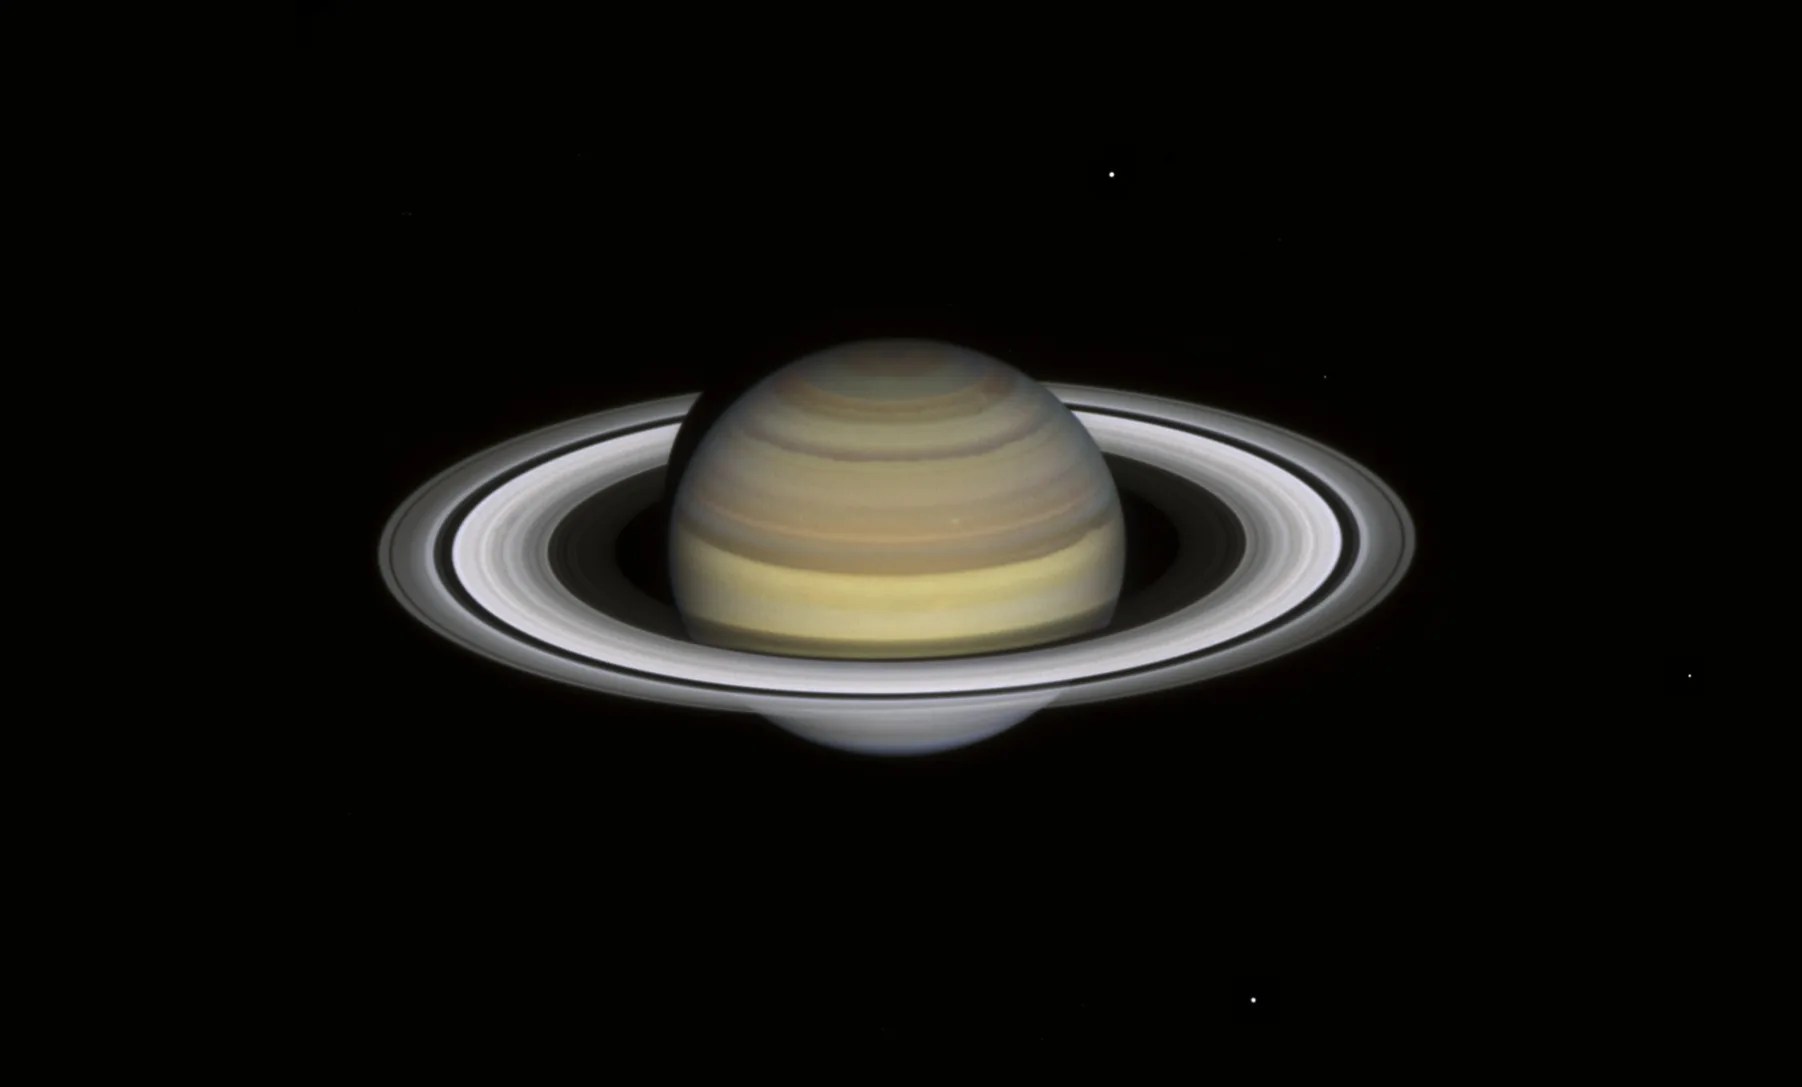 Hubble 2021 image of Saturn and its rings. Yellowish, darker yellow, and greenish bands. White, black, and grey rings surround the planet.